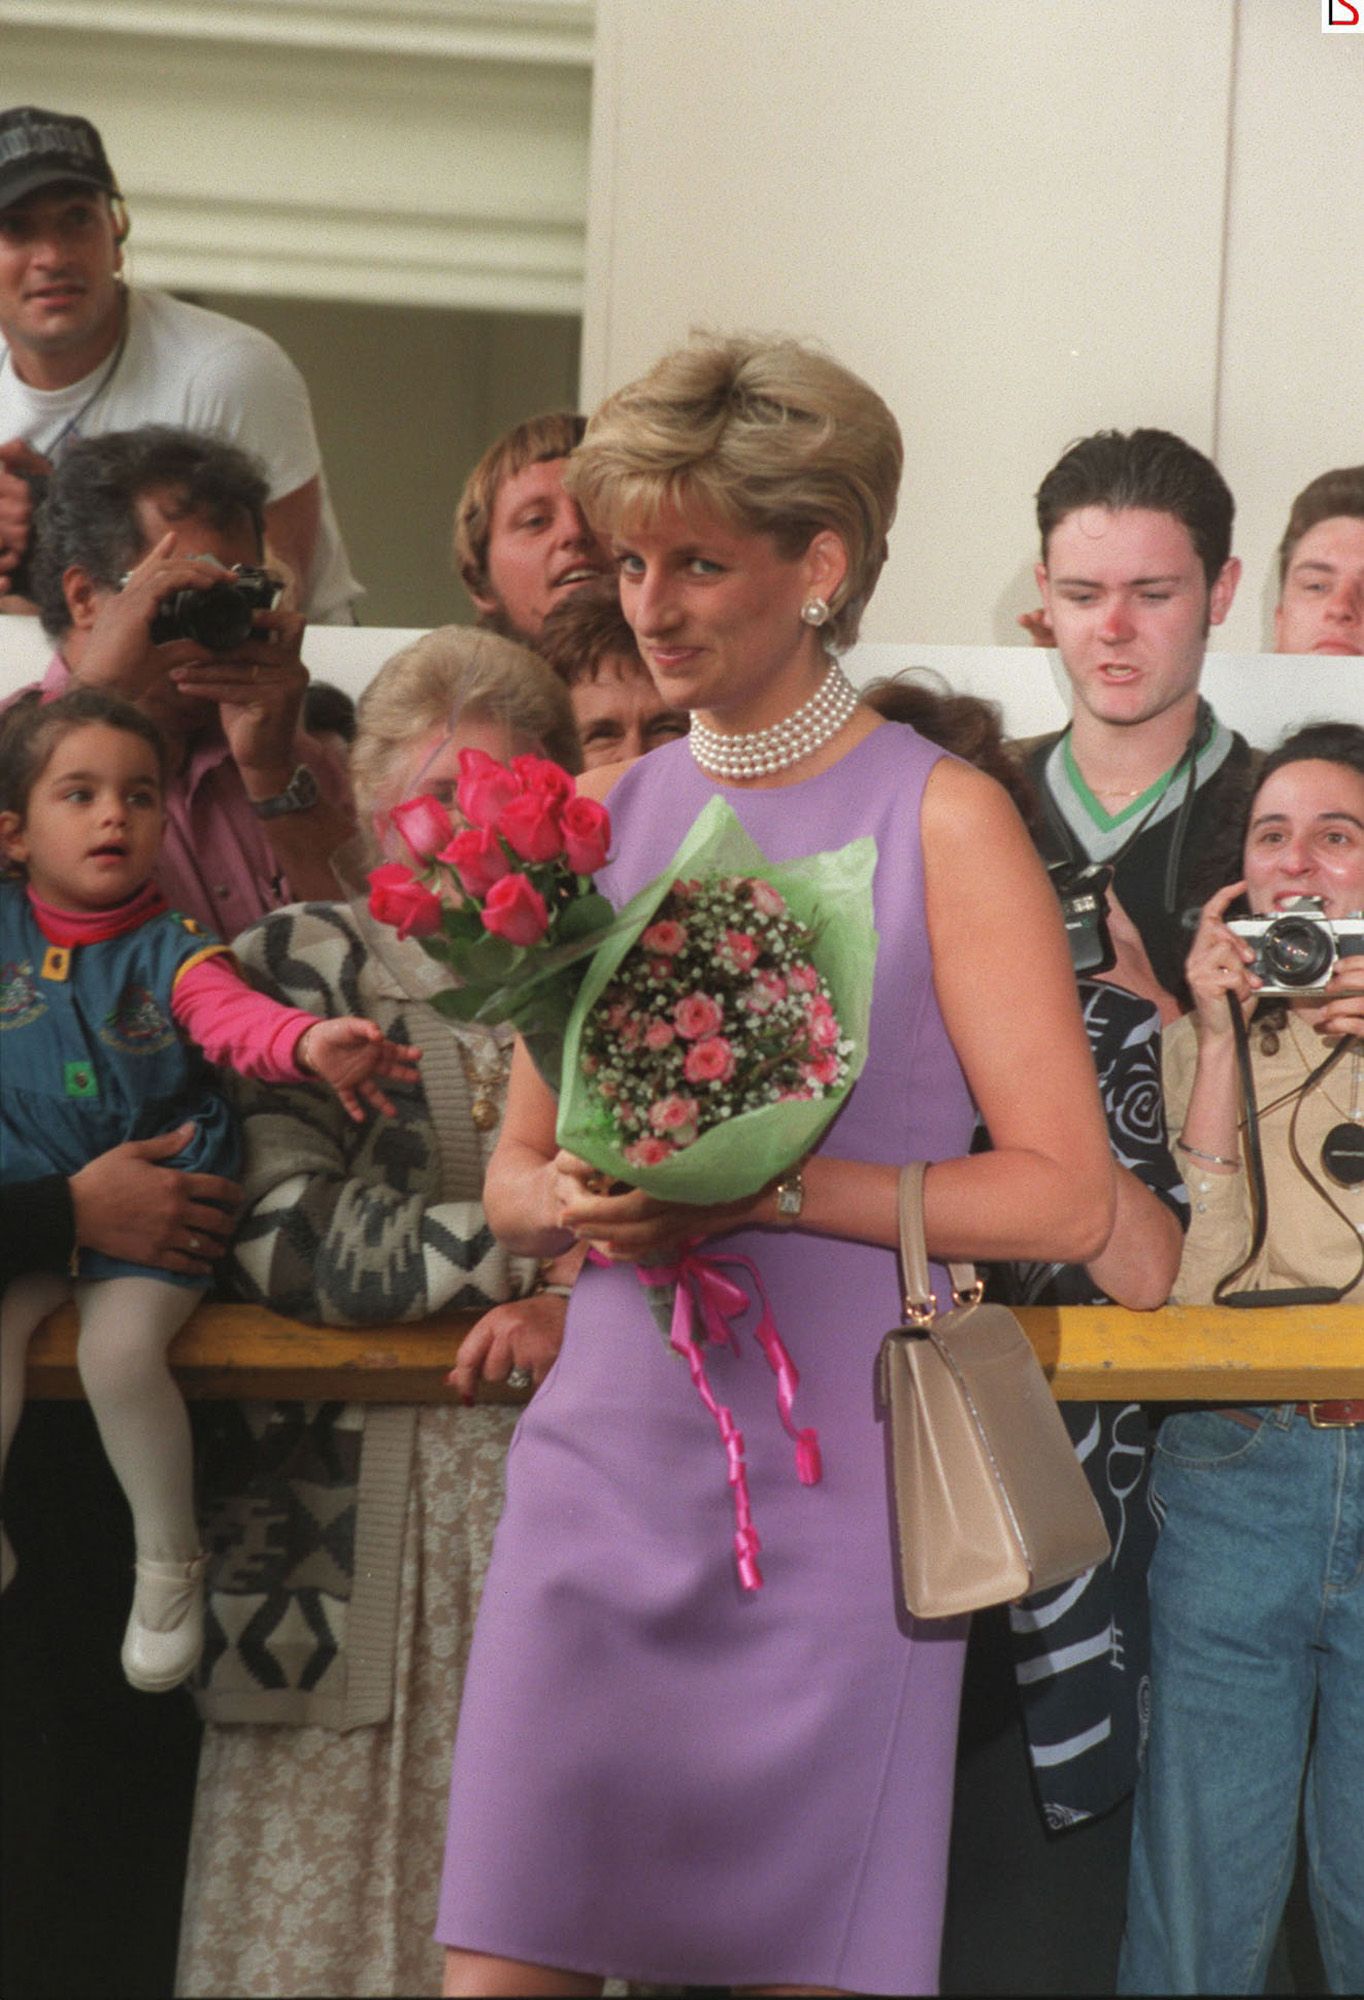 NOV 1996 - DIANA, PRINCESS OF WALES ARRIVING AT THE SACRED HEART HOSPICE IN SYDNEY. (Photo by Patrick Riviere/Getty Images)